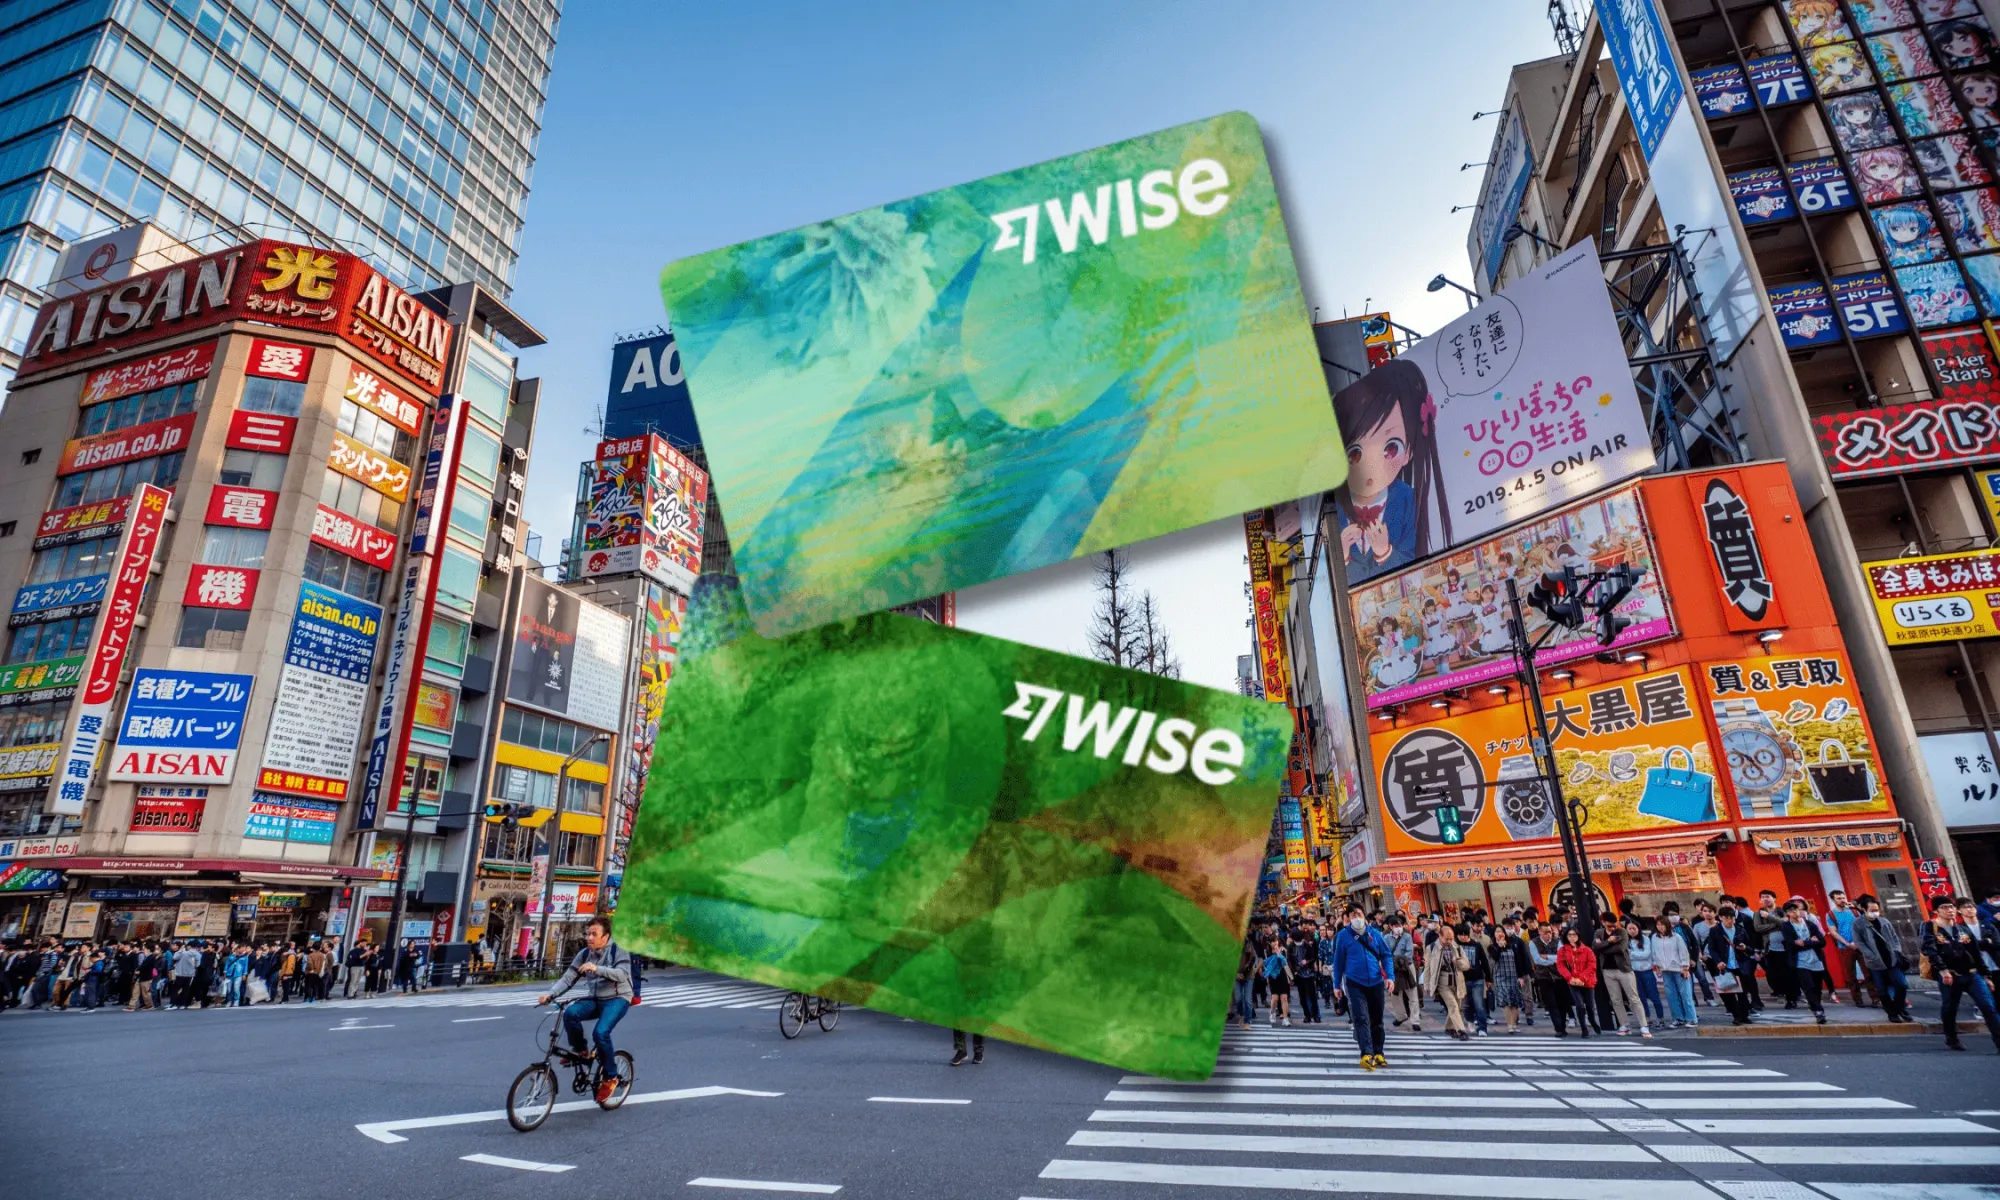 Wise travel debit card with Tokyo in the background